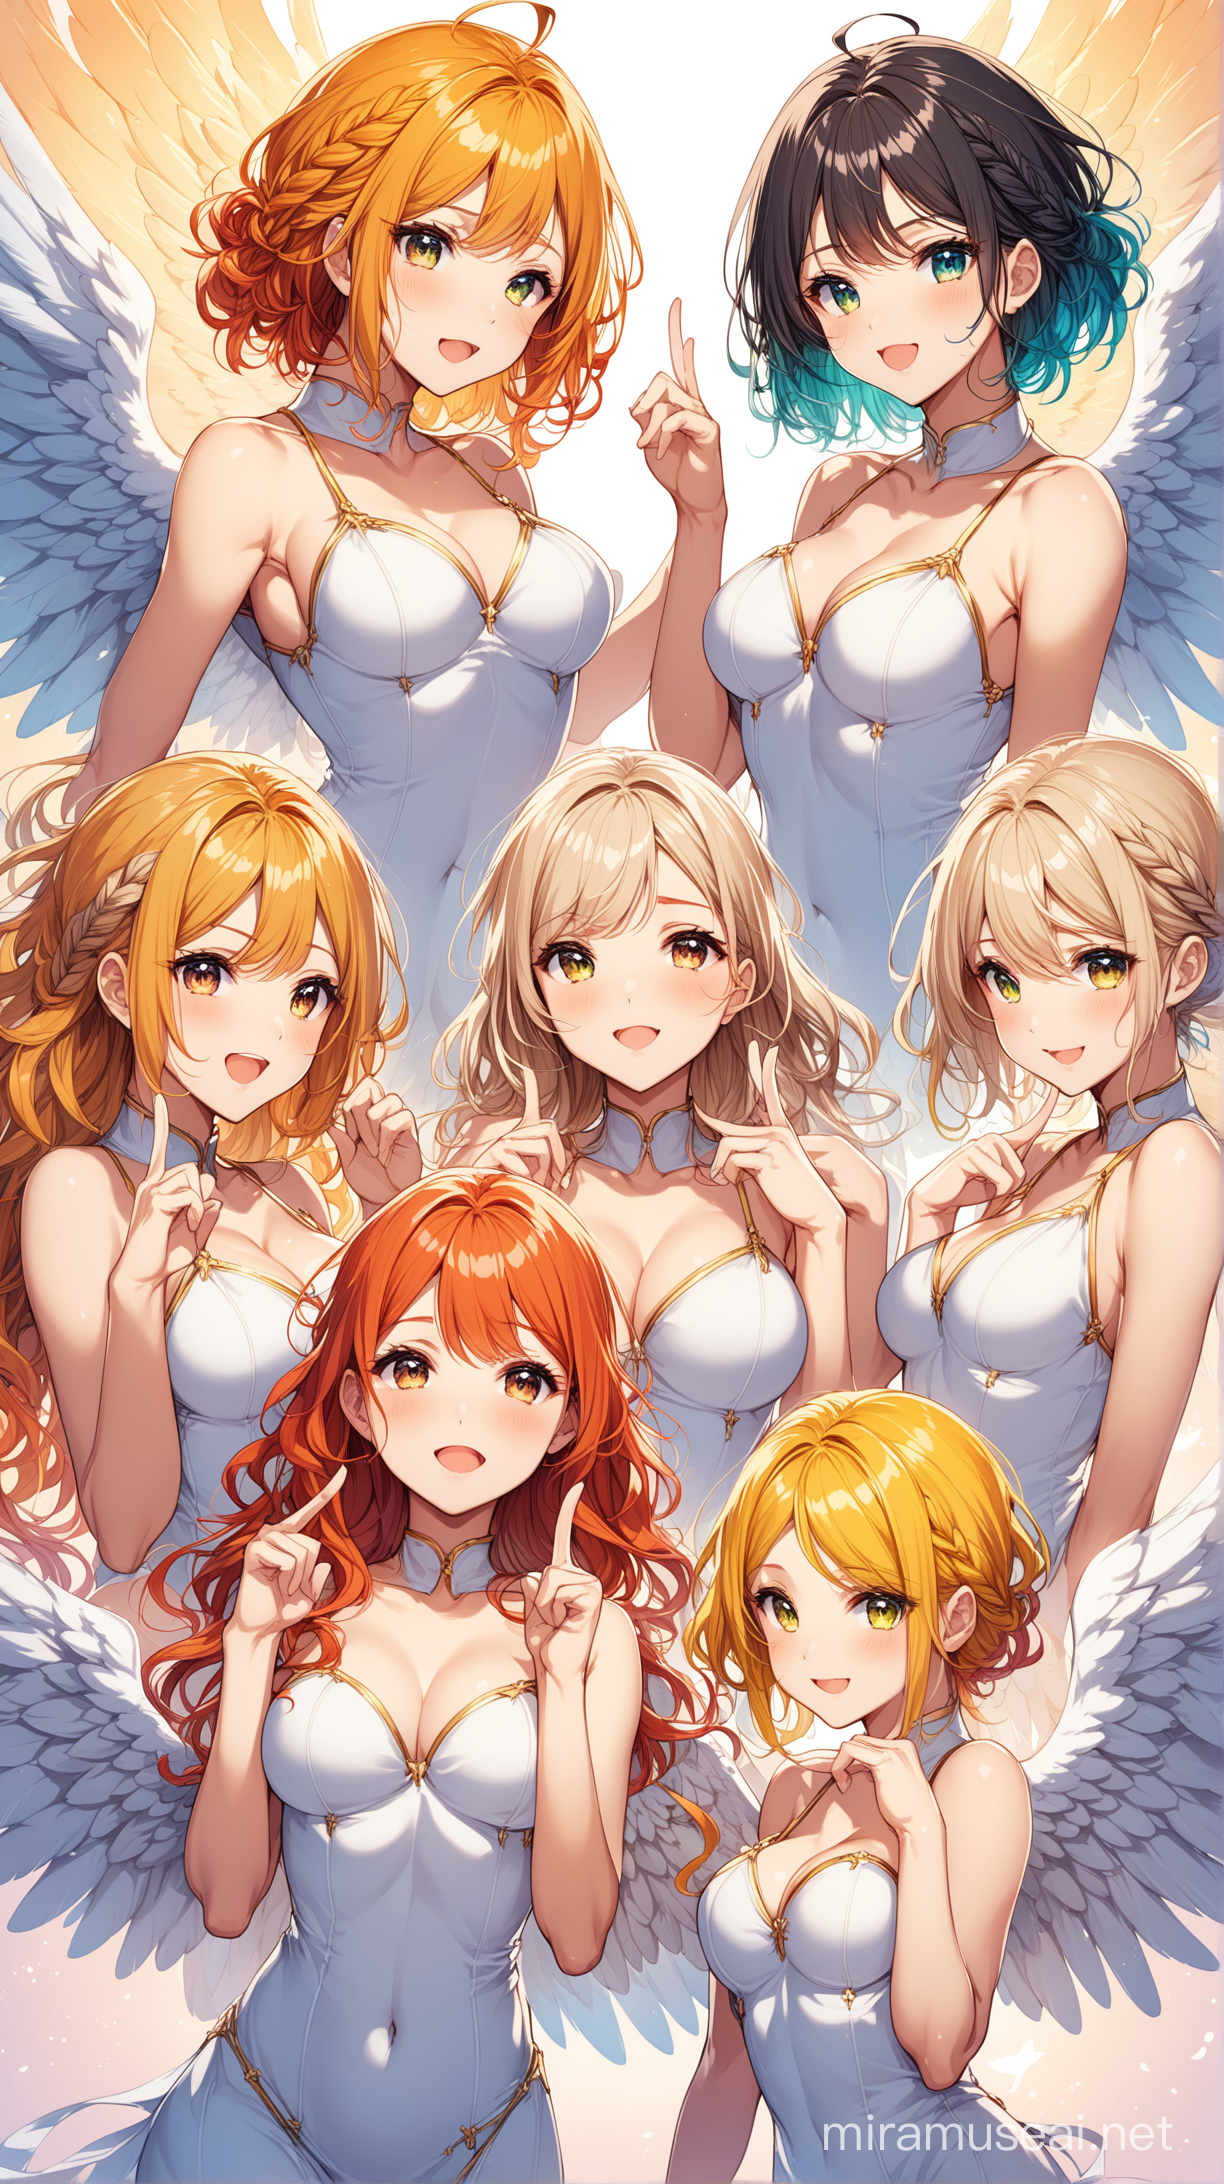 (masterpieces), best quality, three angels with varied outfits, [varied hairstyles], varied different faces, different colors, angel wings, poses, exposed fingers. Anime style different body types, different emotions 